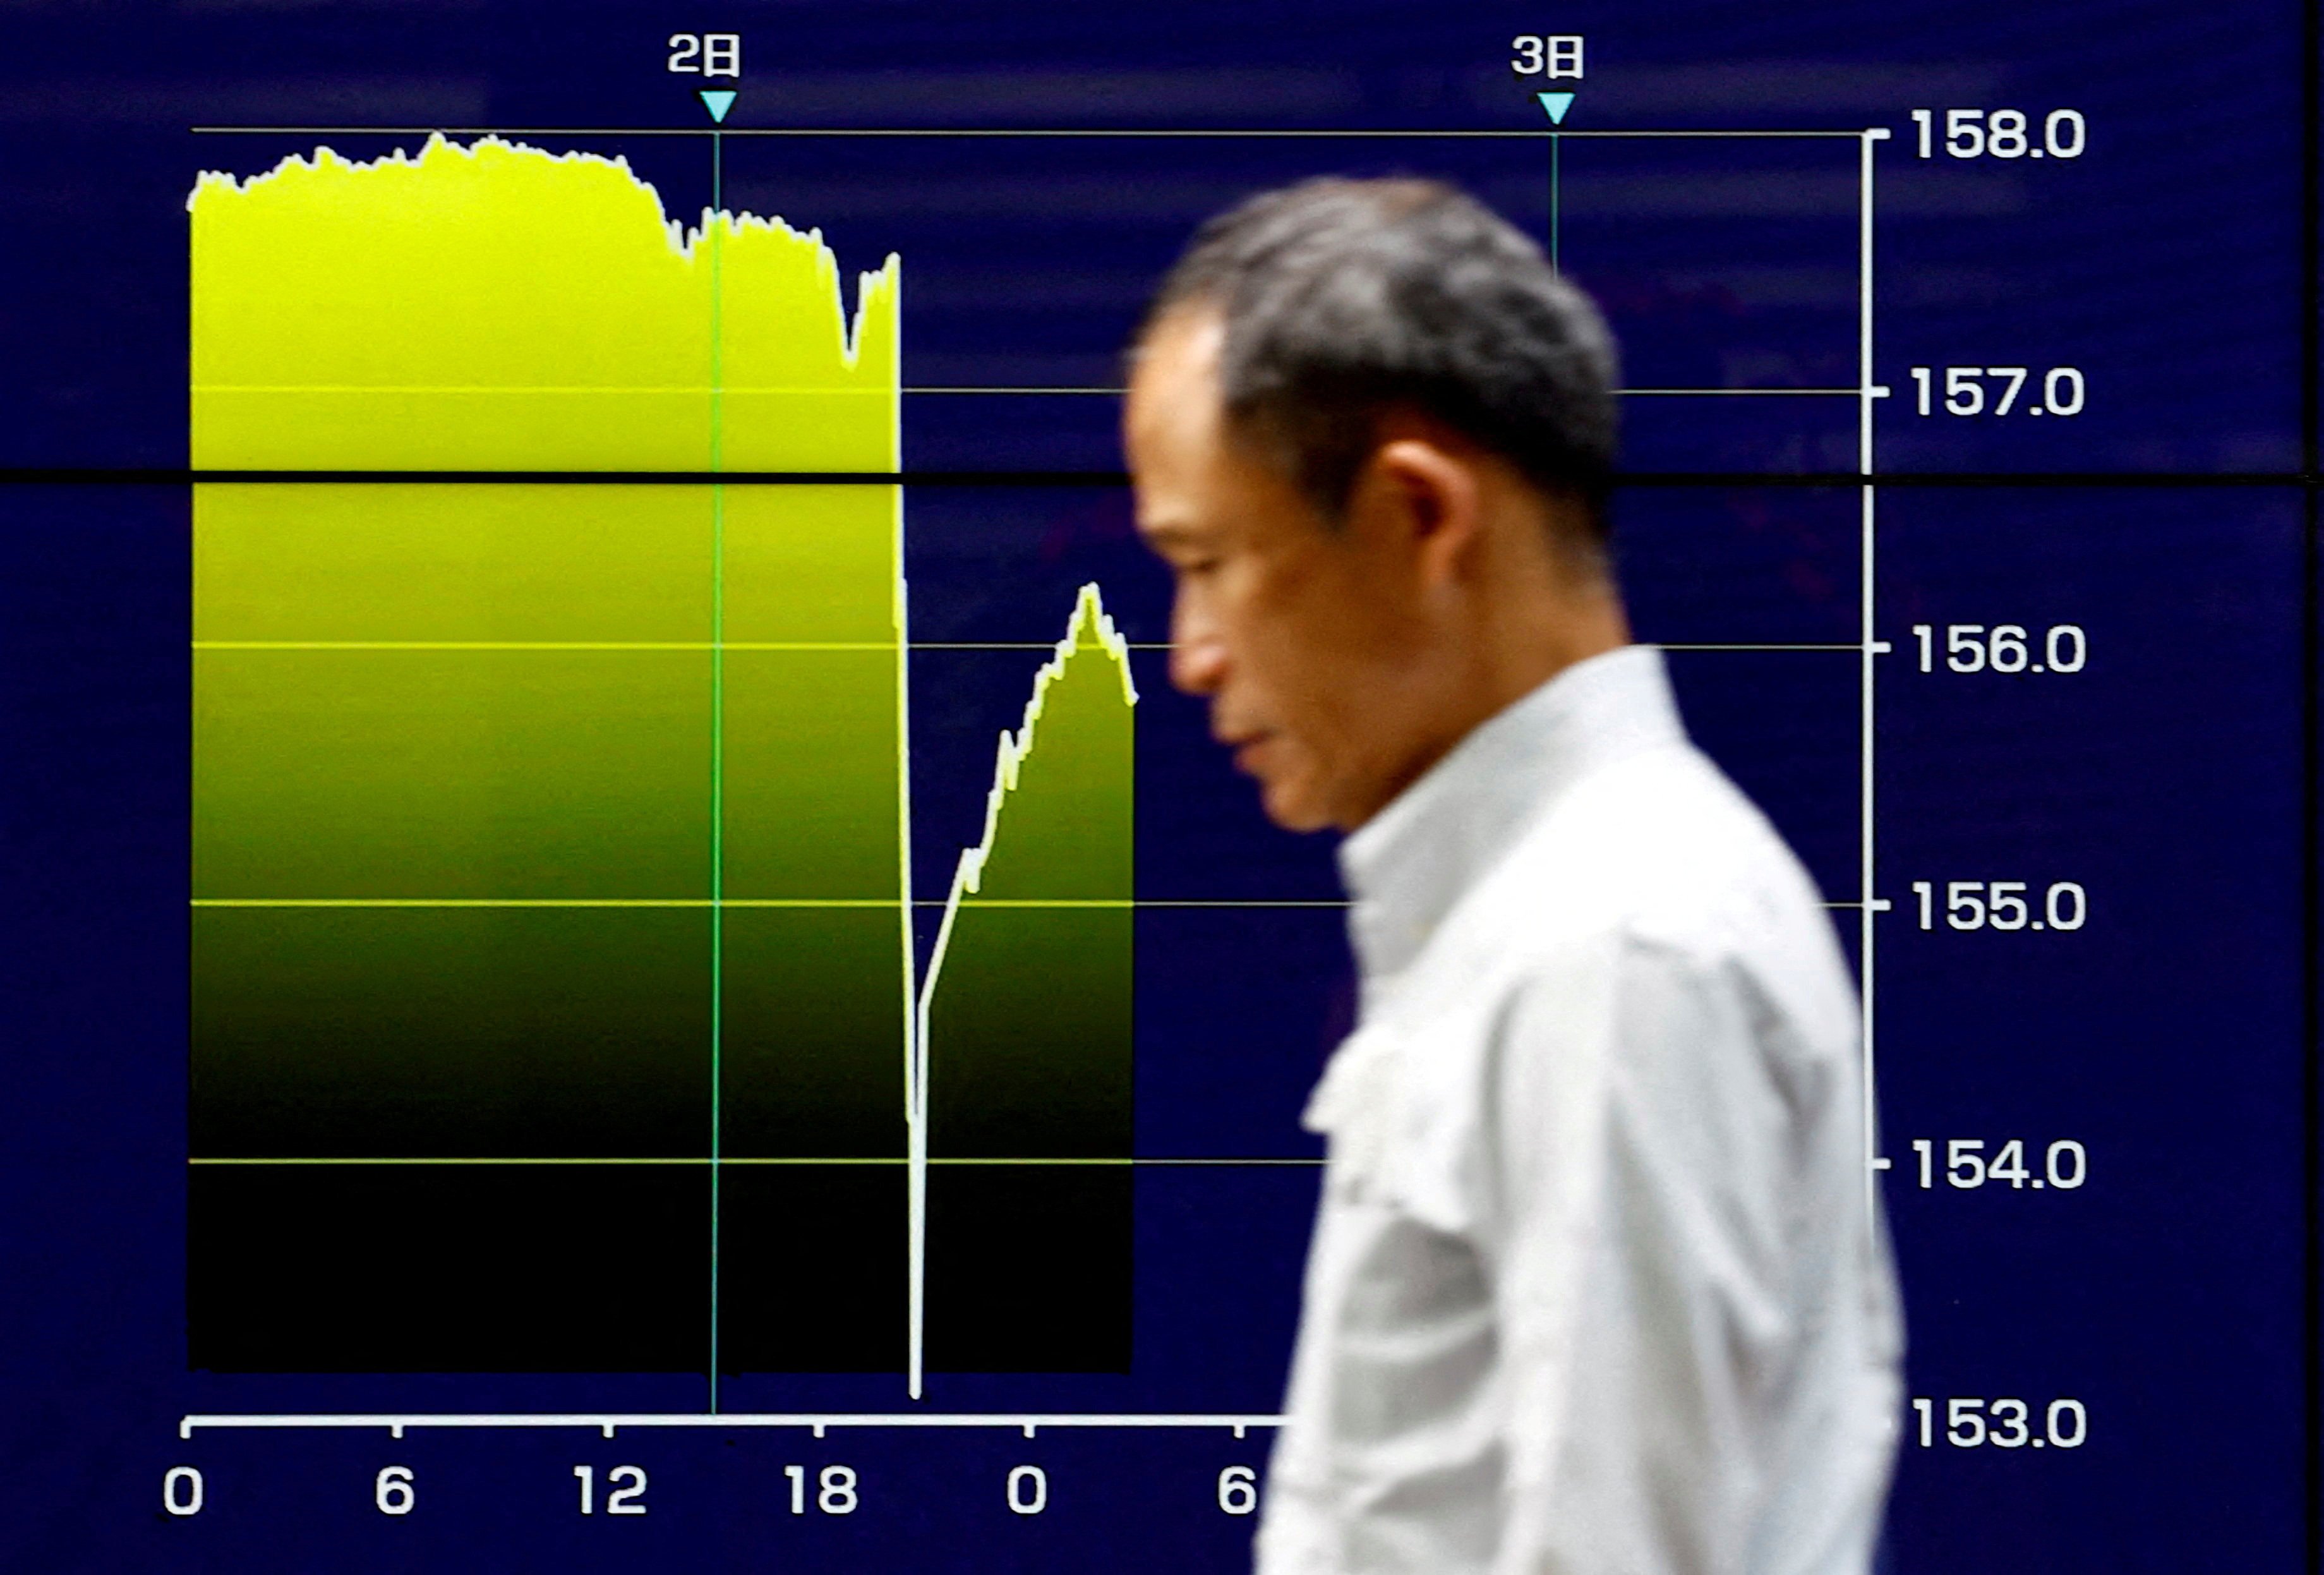 A man walks past an electronic screen displaying a graph showing a surge in Japanese yen exchange rates against the US dollar, amid signs of intervention by Japanese authorities, in Tokyo on May 2. Photo: Reuters